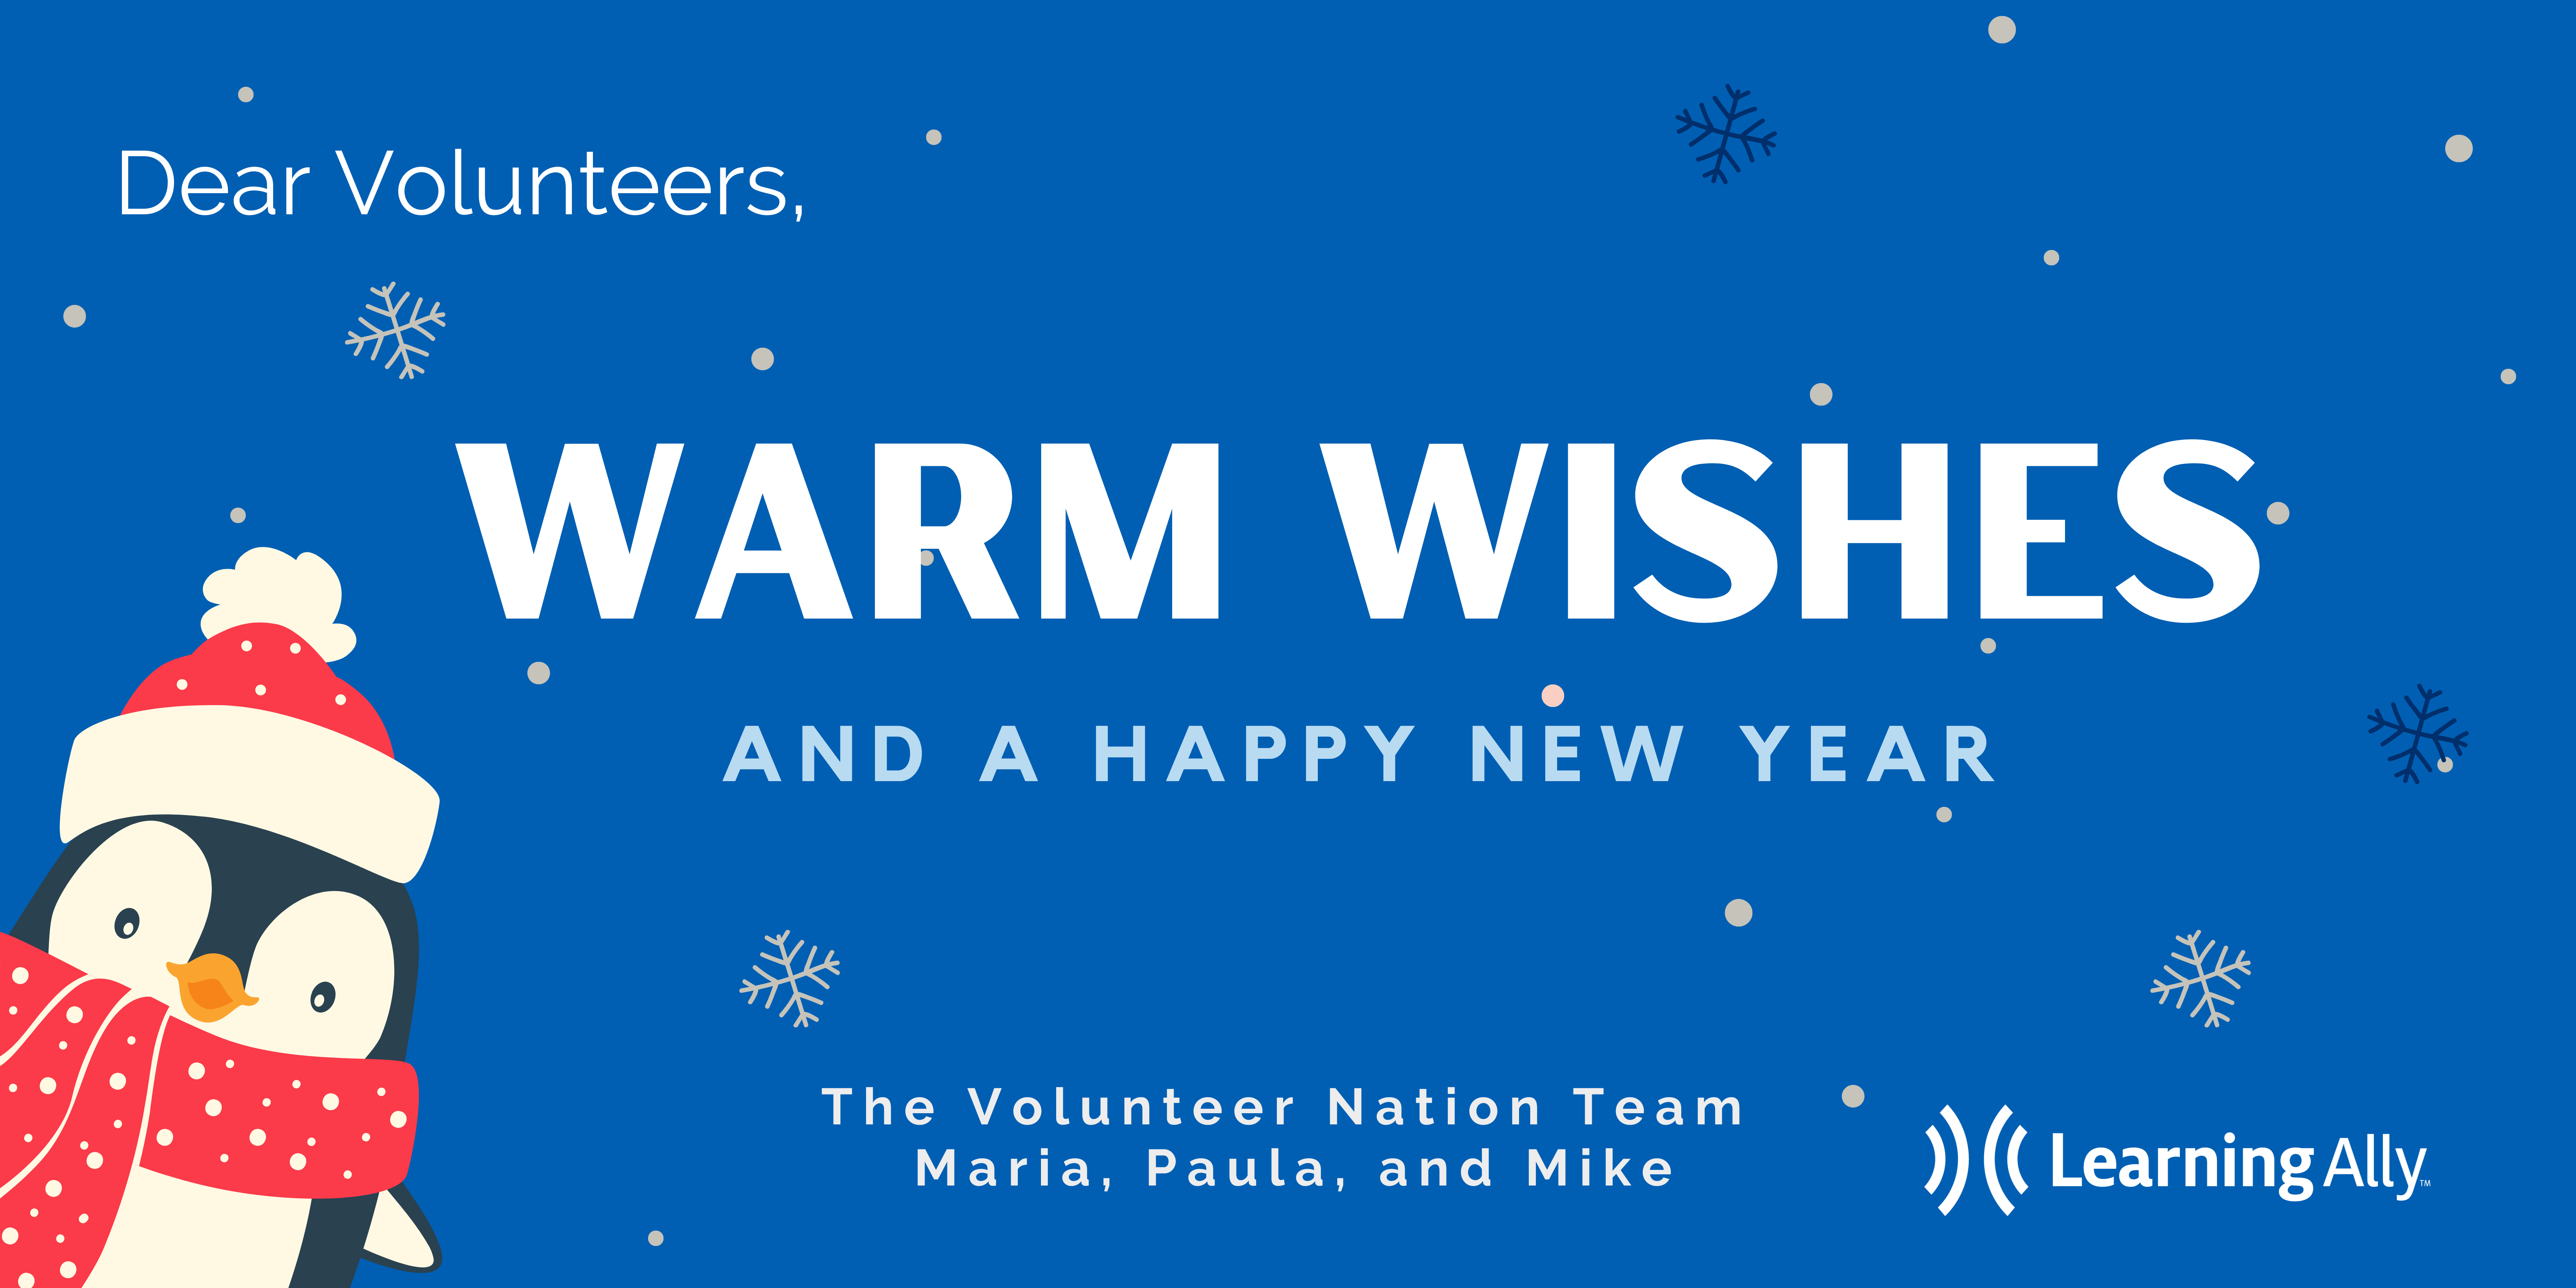 Warm wishes and a happy new year to our volunteers